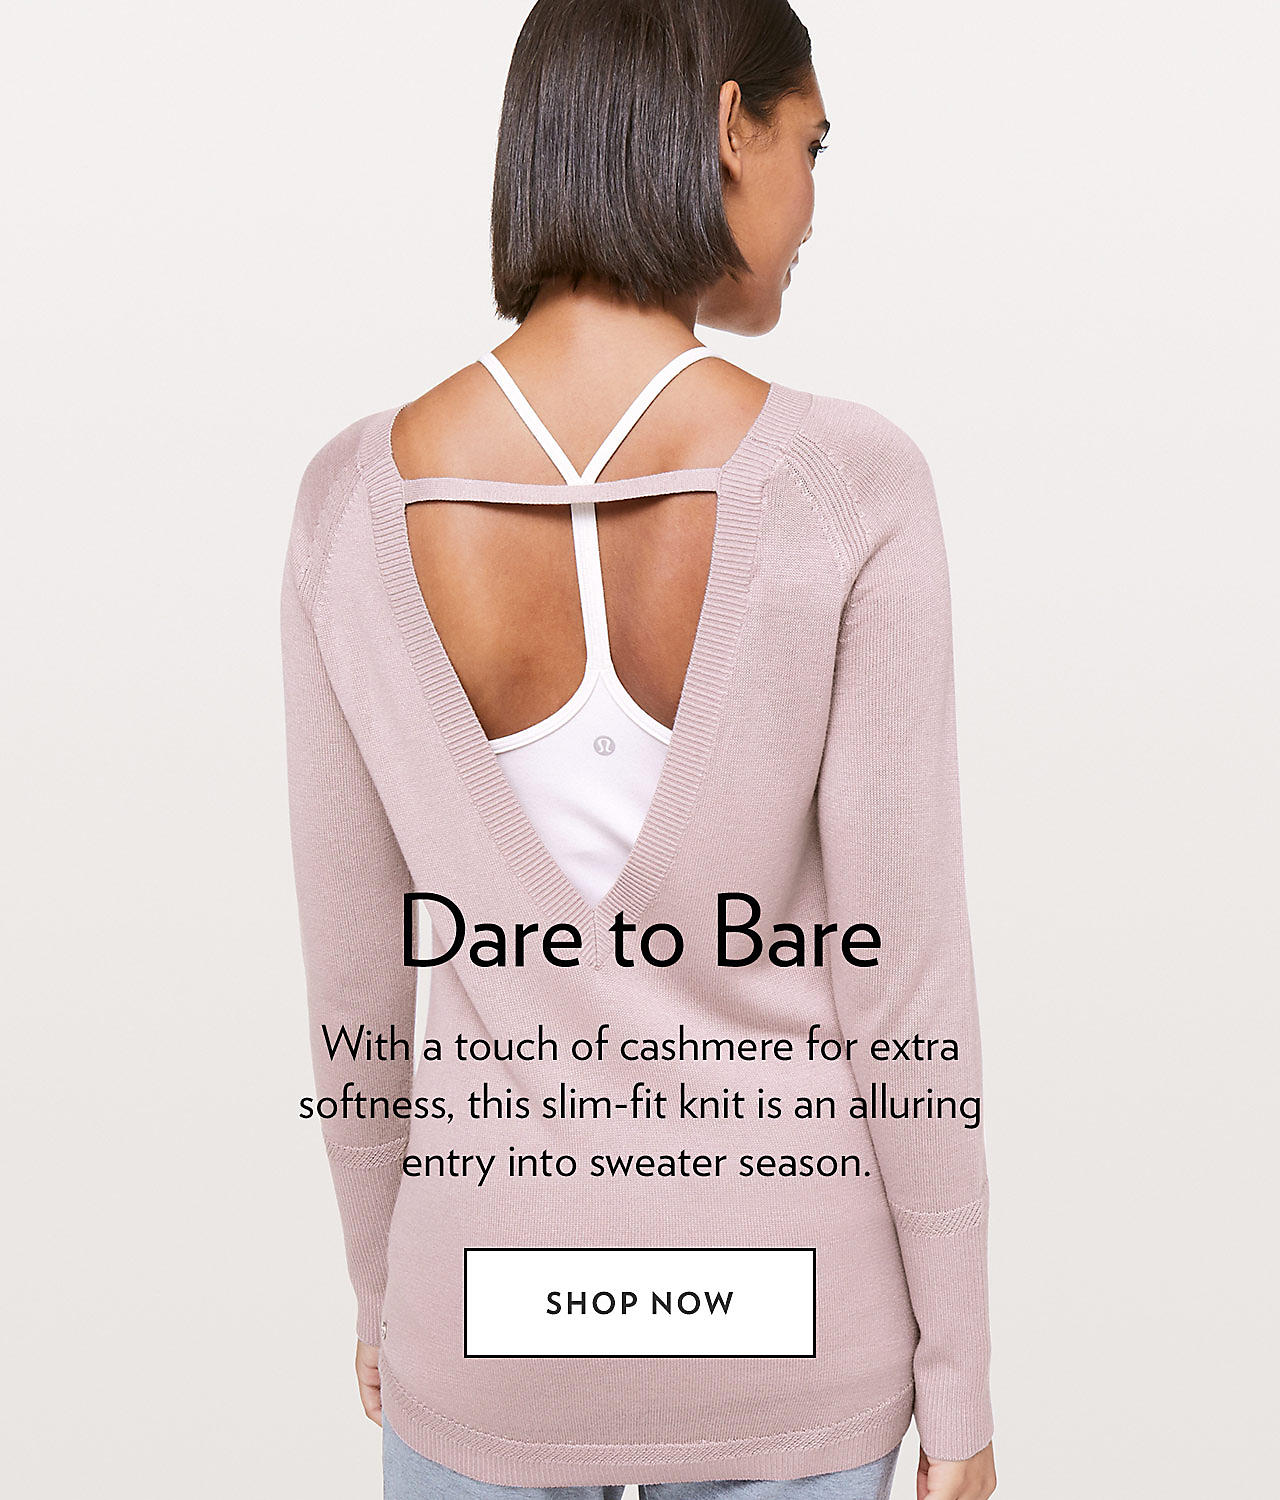 Dare to Bare - SHOP NOW